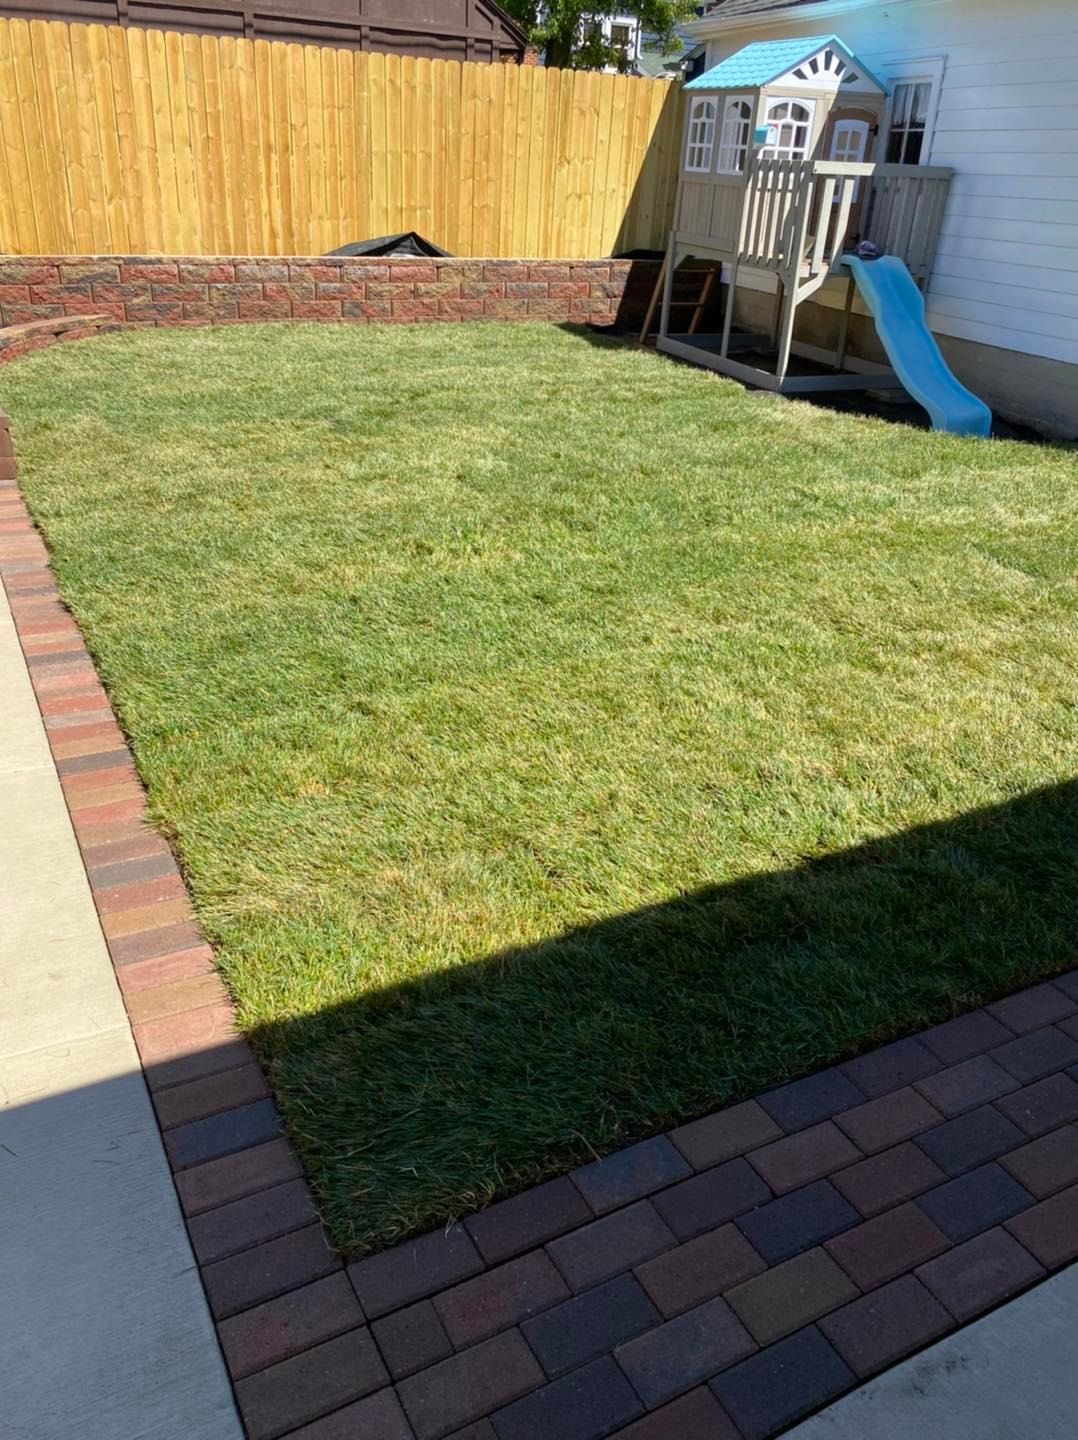 a fresh and green yard after cleanup